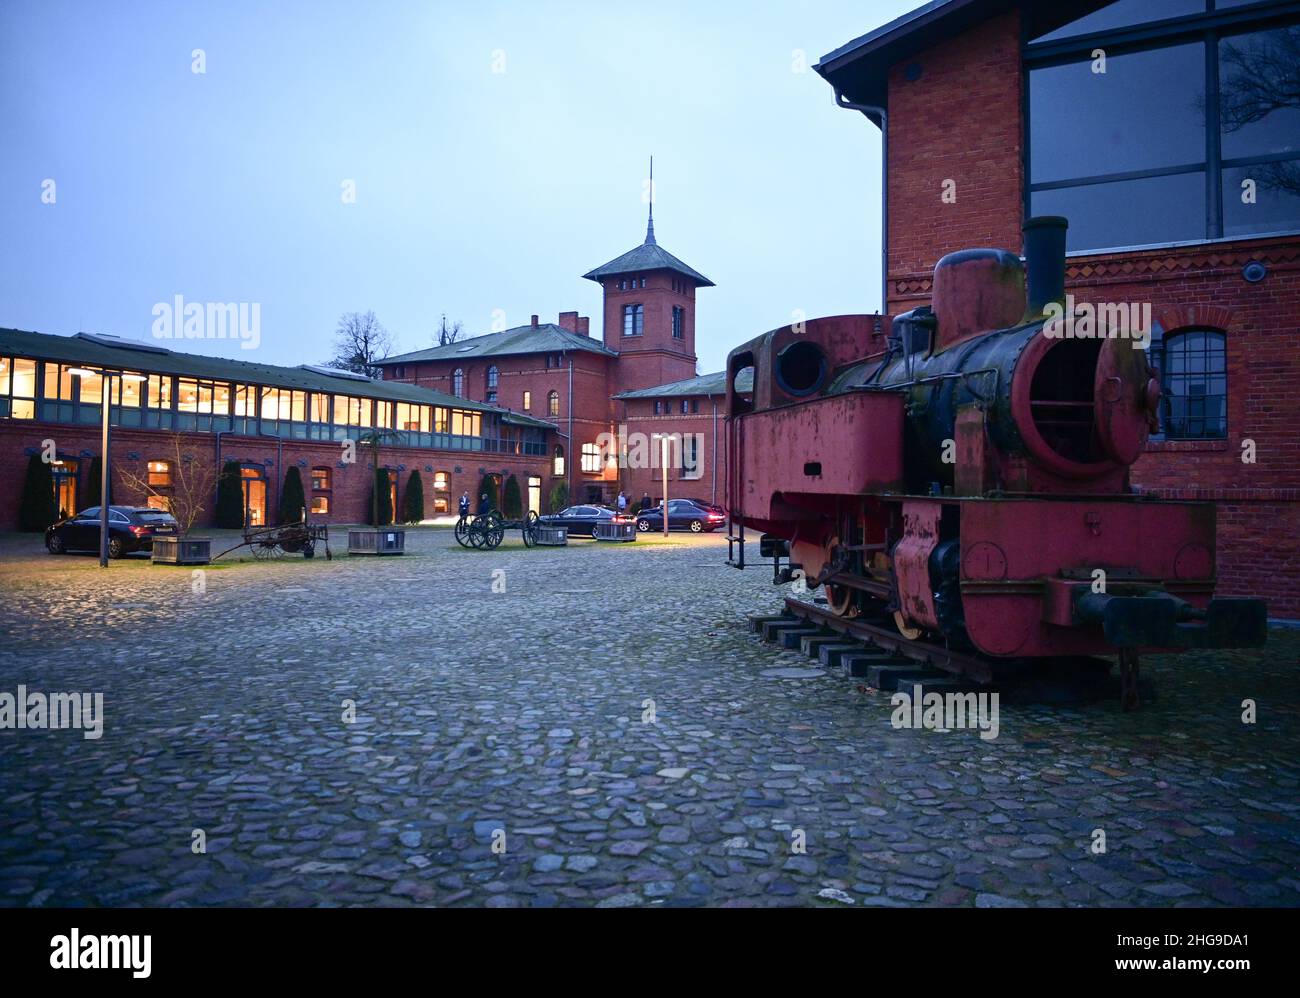 Nauen, Germany. 16th Jan, 2022. A historic steam locomotive stands in the courtyard of Landgut Stober. The former estate of the Borsig family is located on the Groß Behnitzer See lake and was voted the greenest hotel in Europe in 2017 and 2021 according to its own information. The conference hotel has 82 double rooms, 172 single rooms (new building) and 20 suites. Credit: Soeren Stache/dpa-Zentralbild/ZB/dpa/Alamy Live News Stock Photo